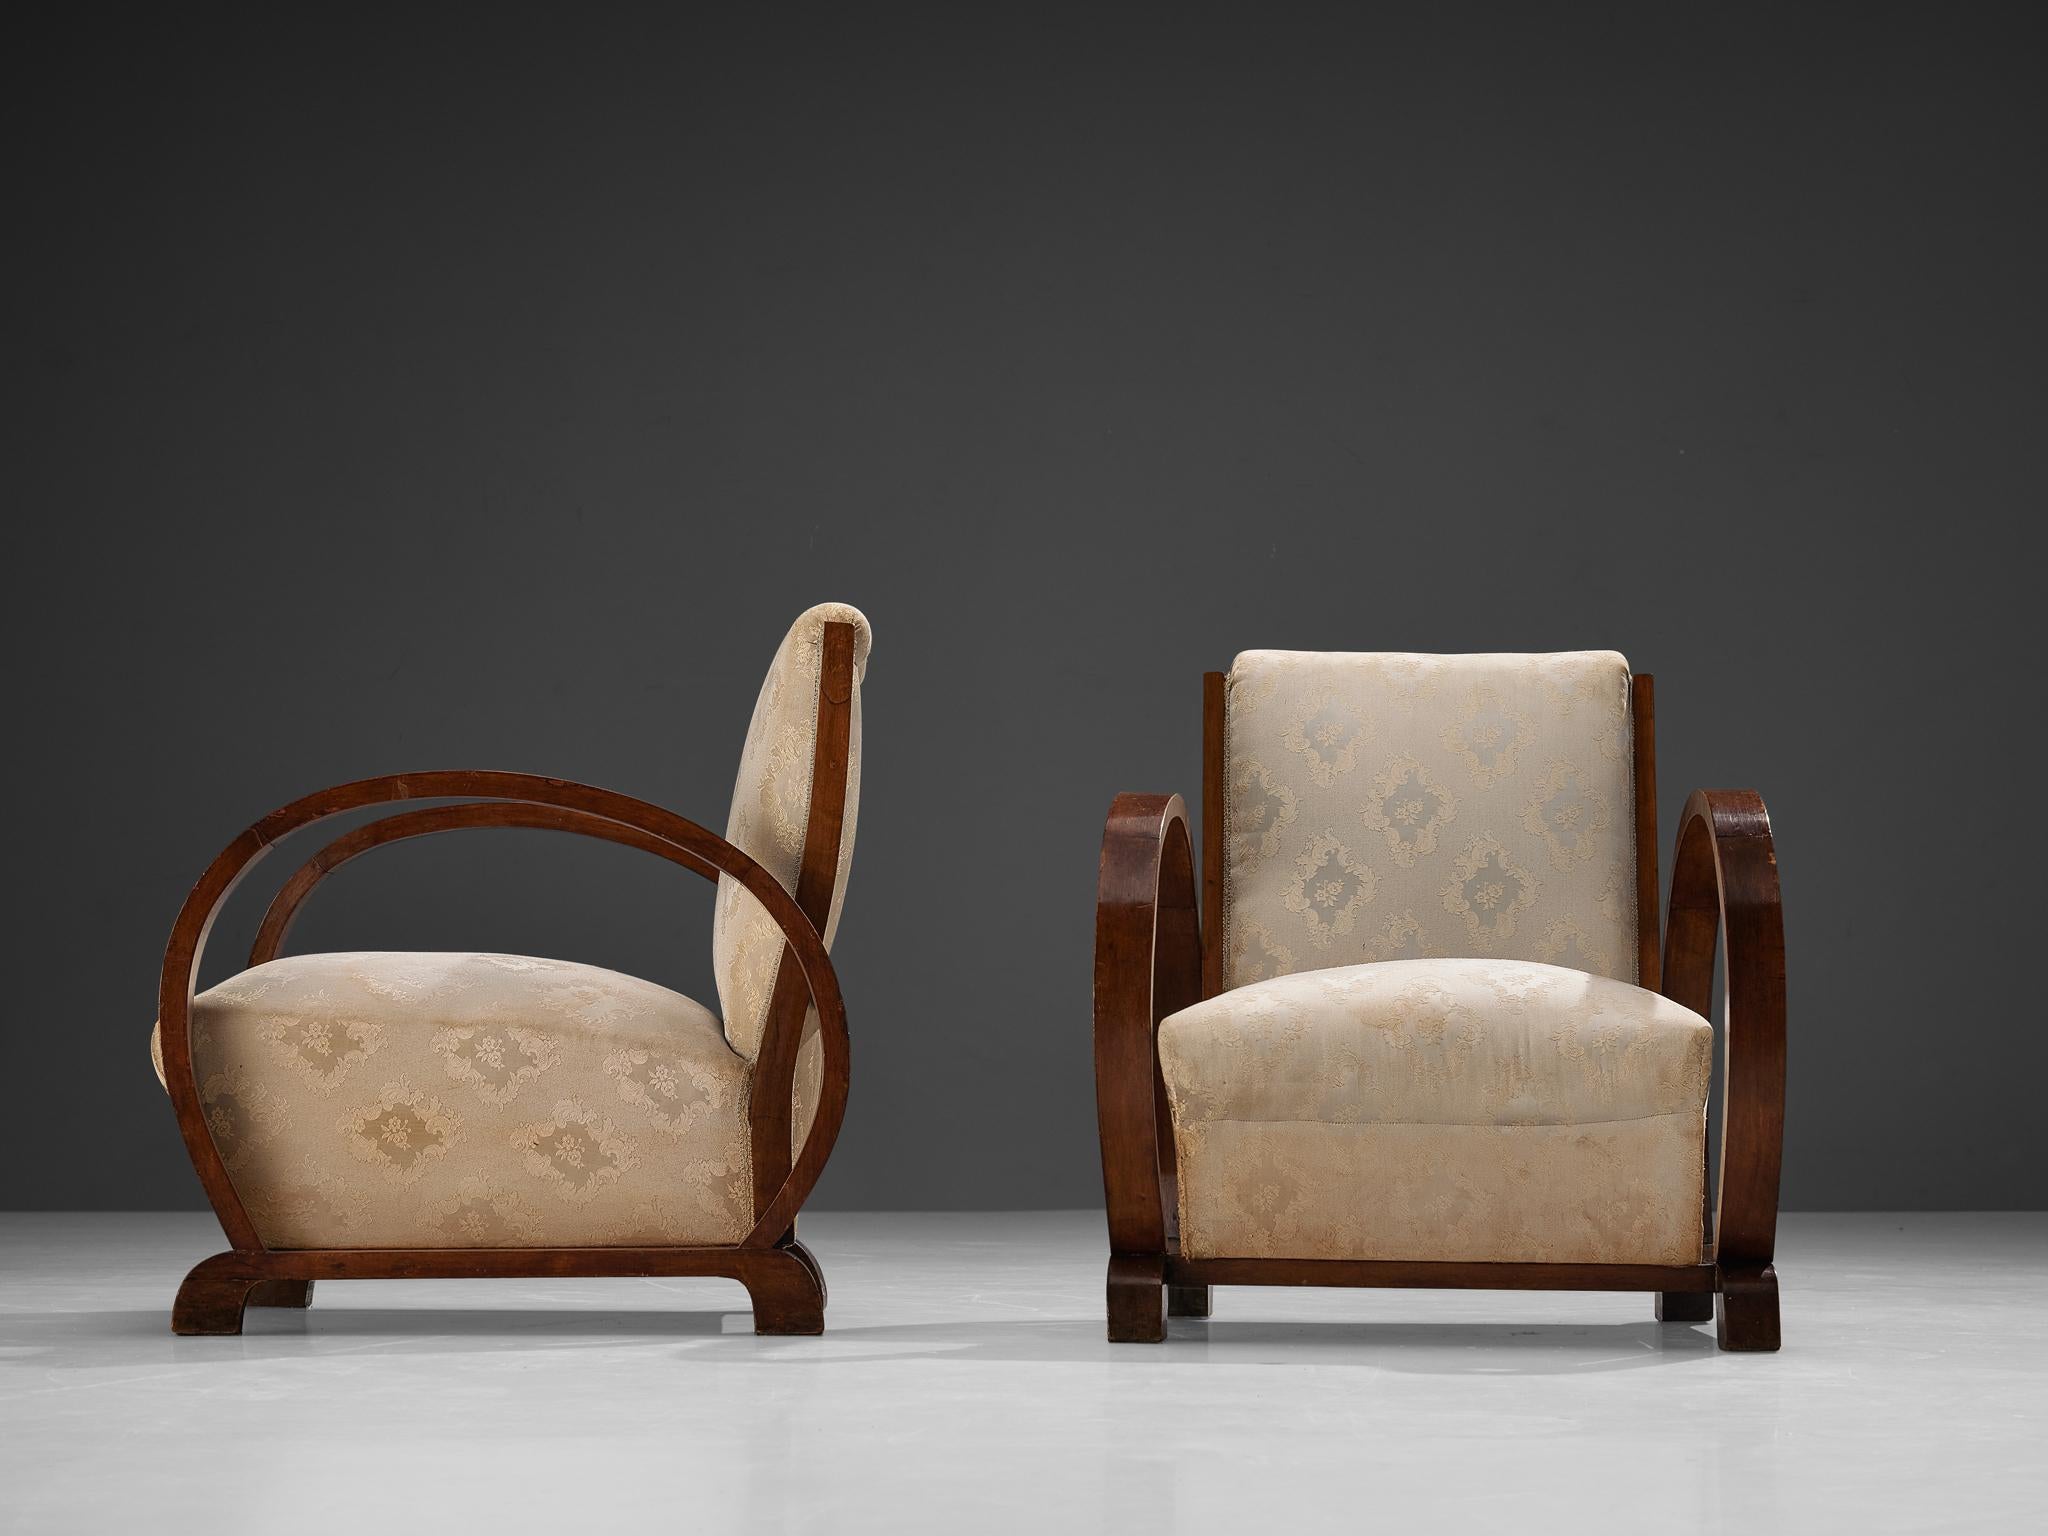 1930 chairs